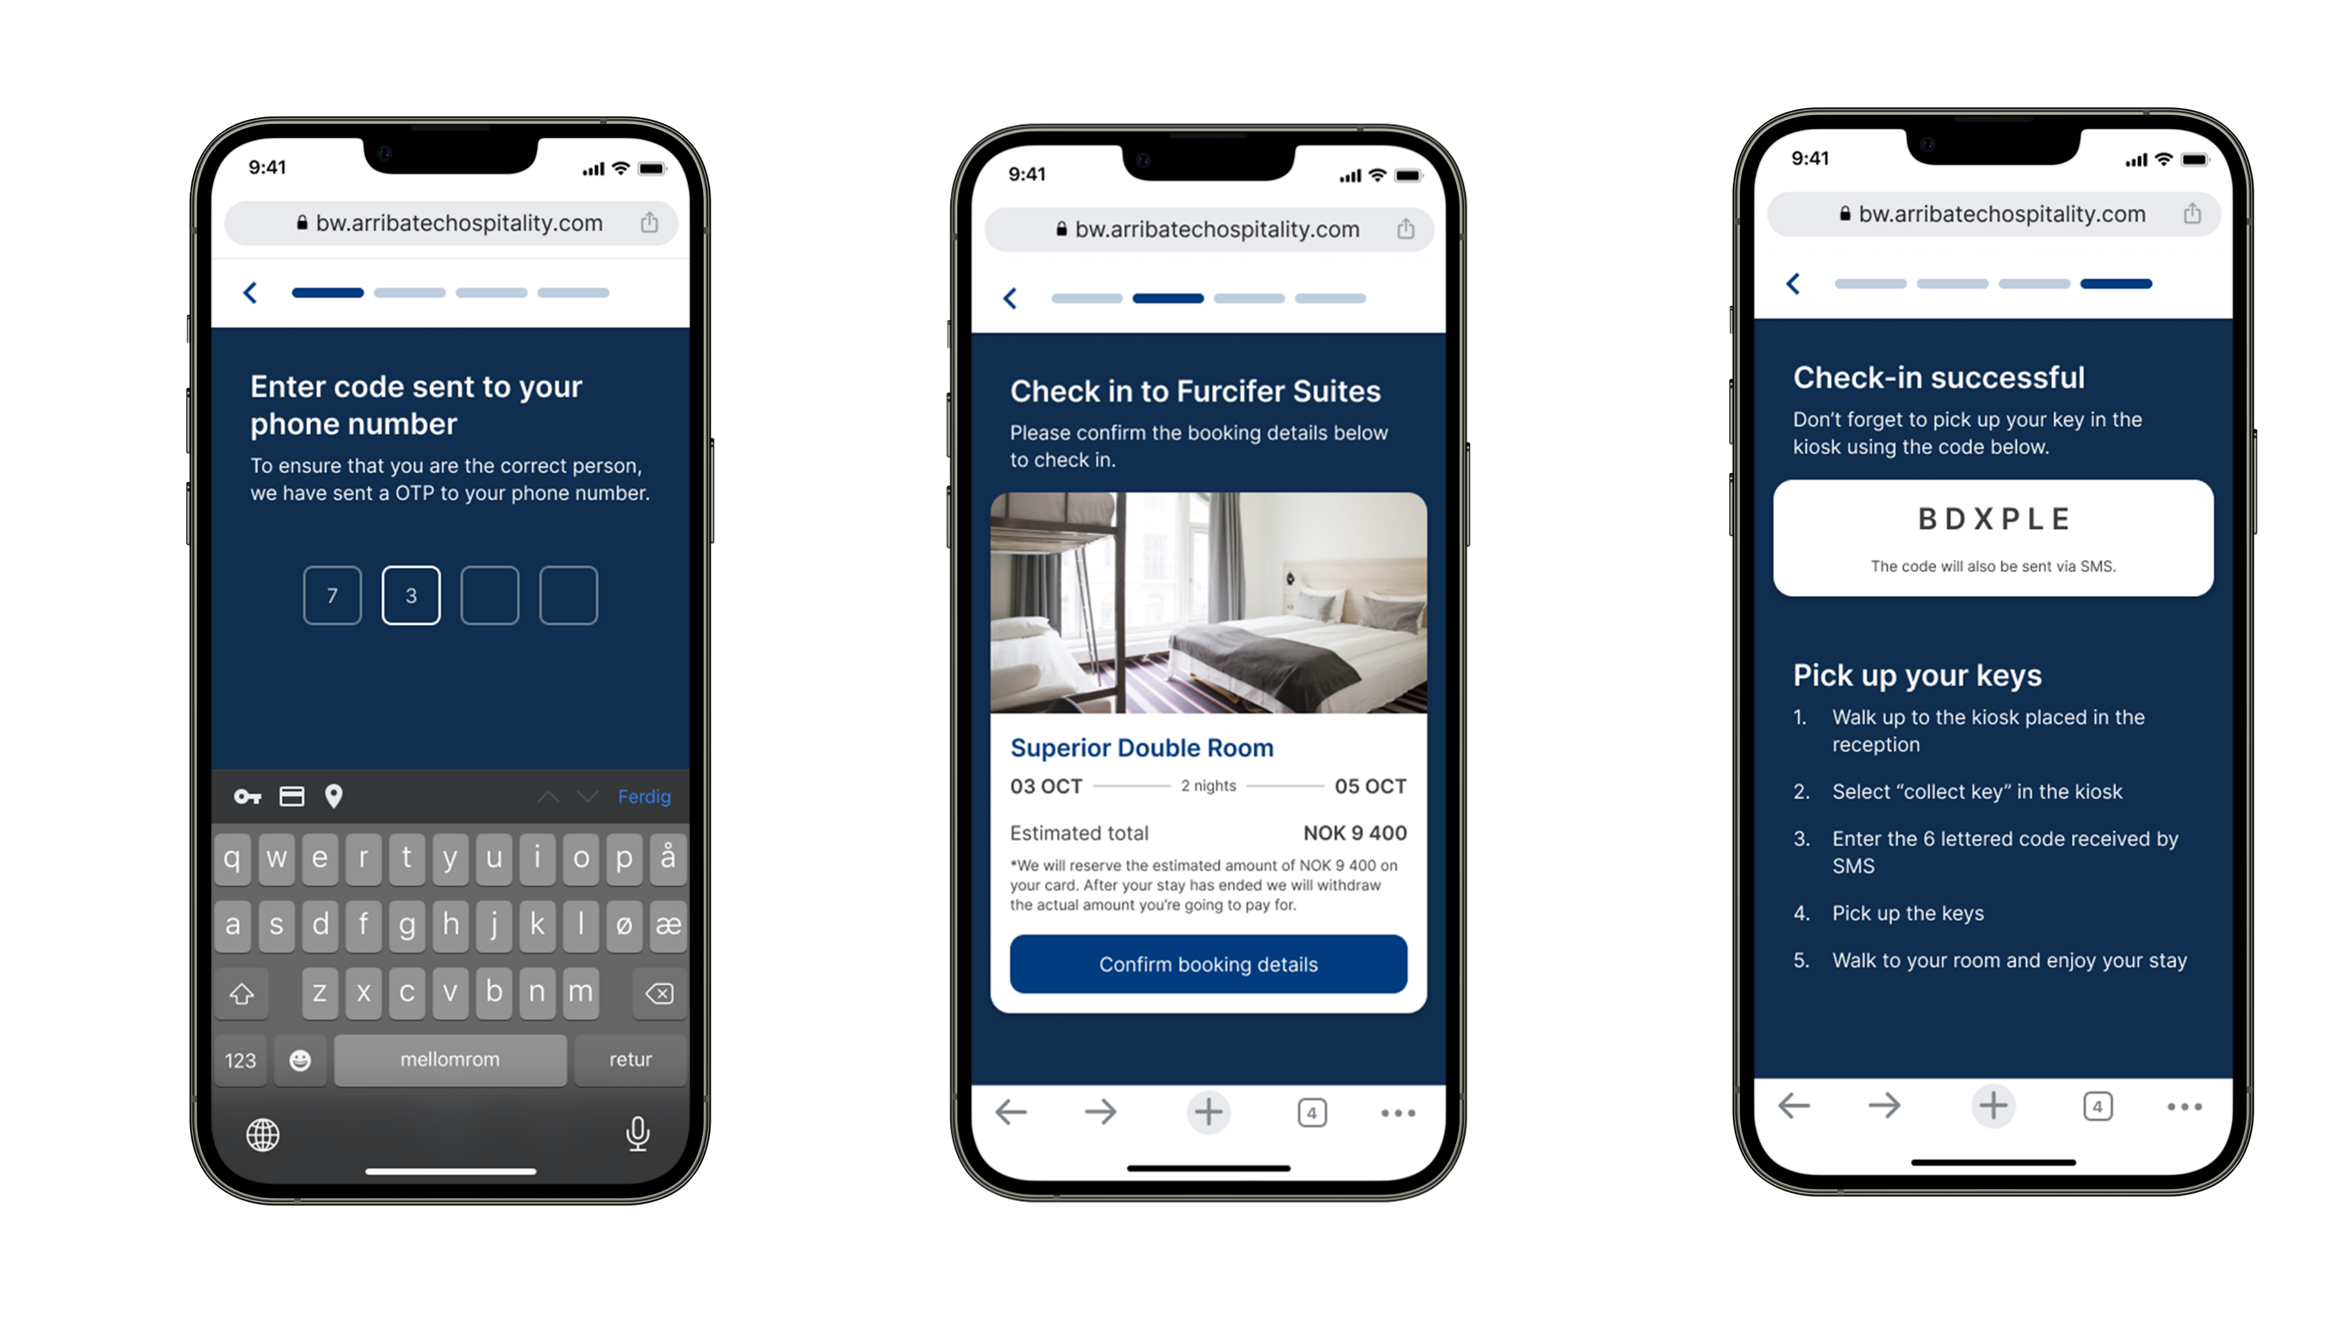 Why hotels need to offer mobile check in The general travel industry is already going digital with self-service and mobile solutions. Why does the digital journey end at the hotel reception, and what are the benefits of mobile check-in solutions for hotels?